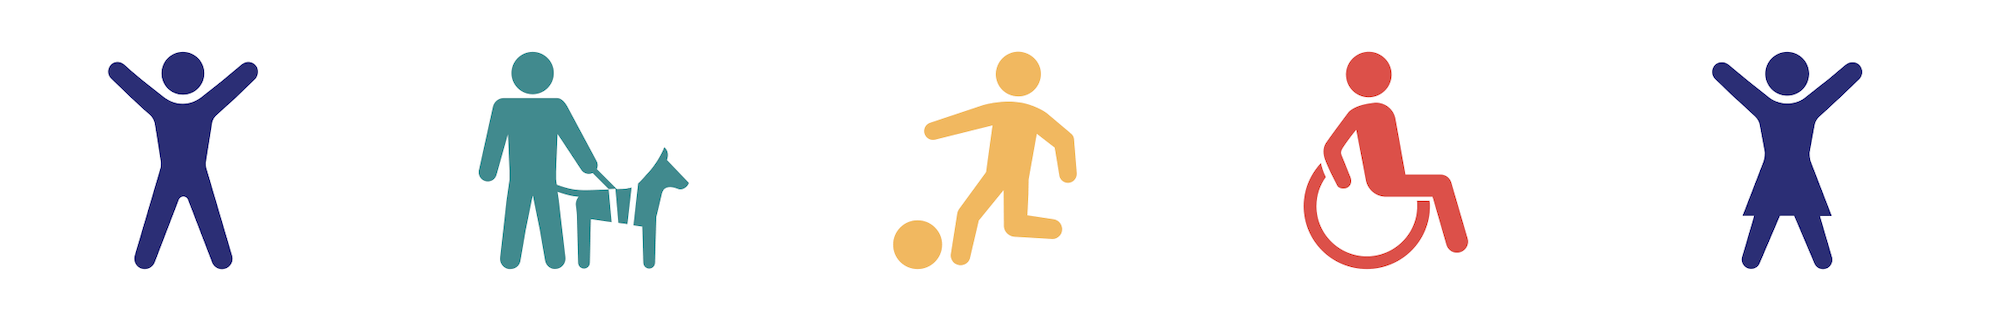 Icons of person jumping, person with seeing-eye dog, person kicking soccer ball, person in wheelchair, person jumping